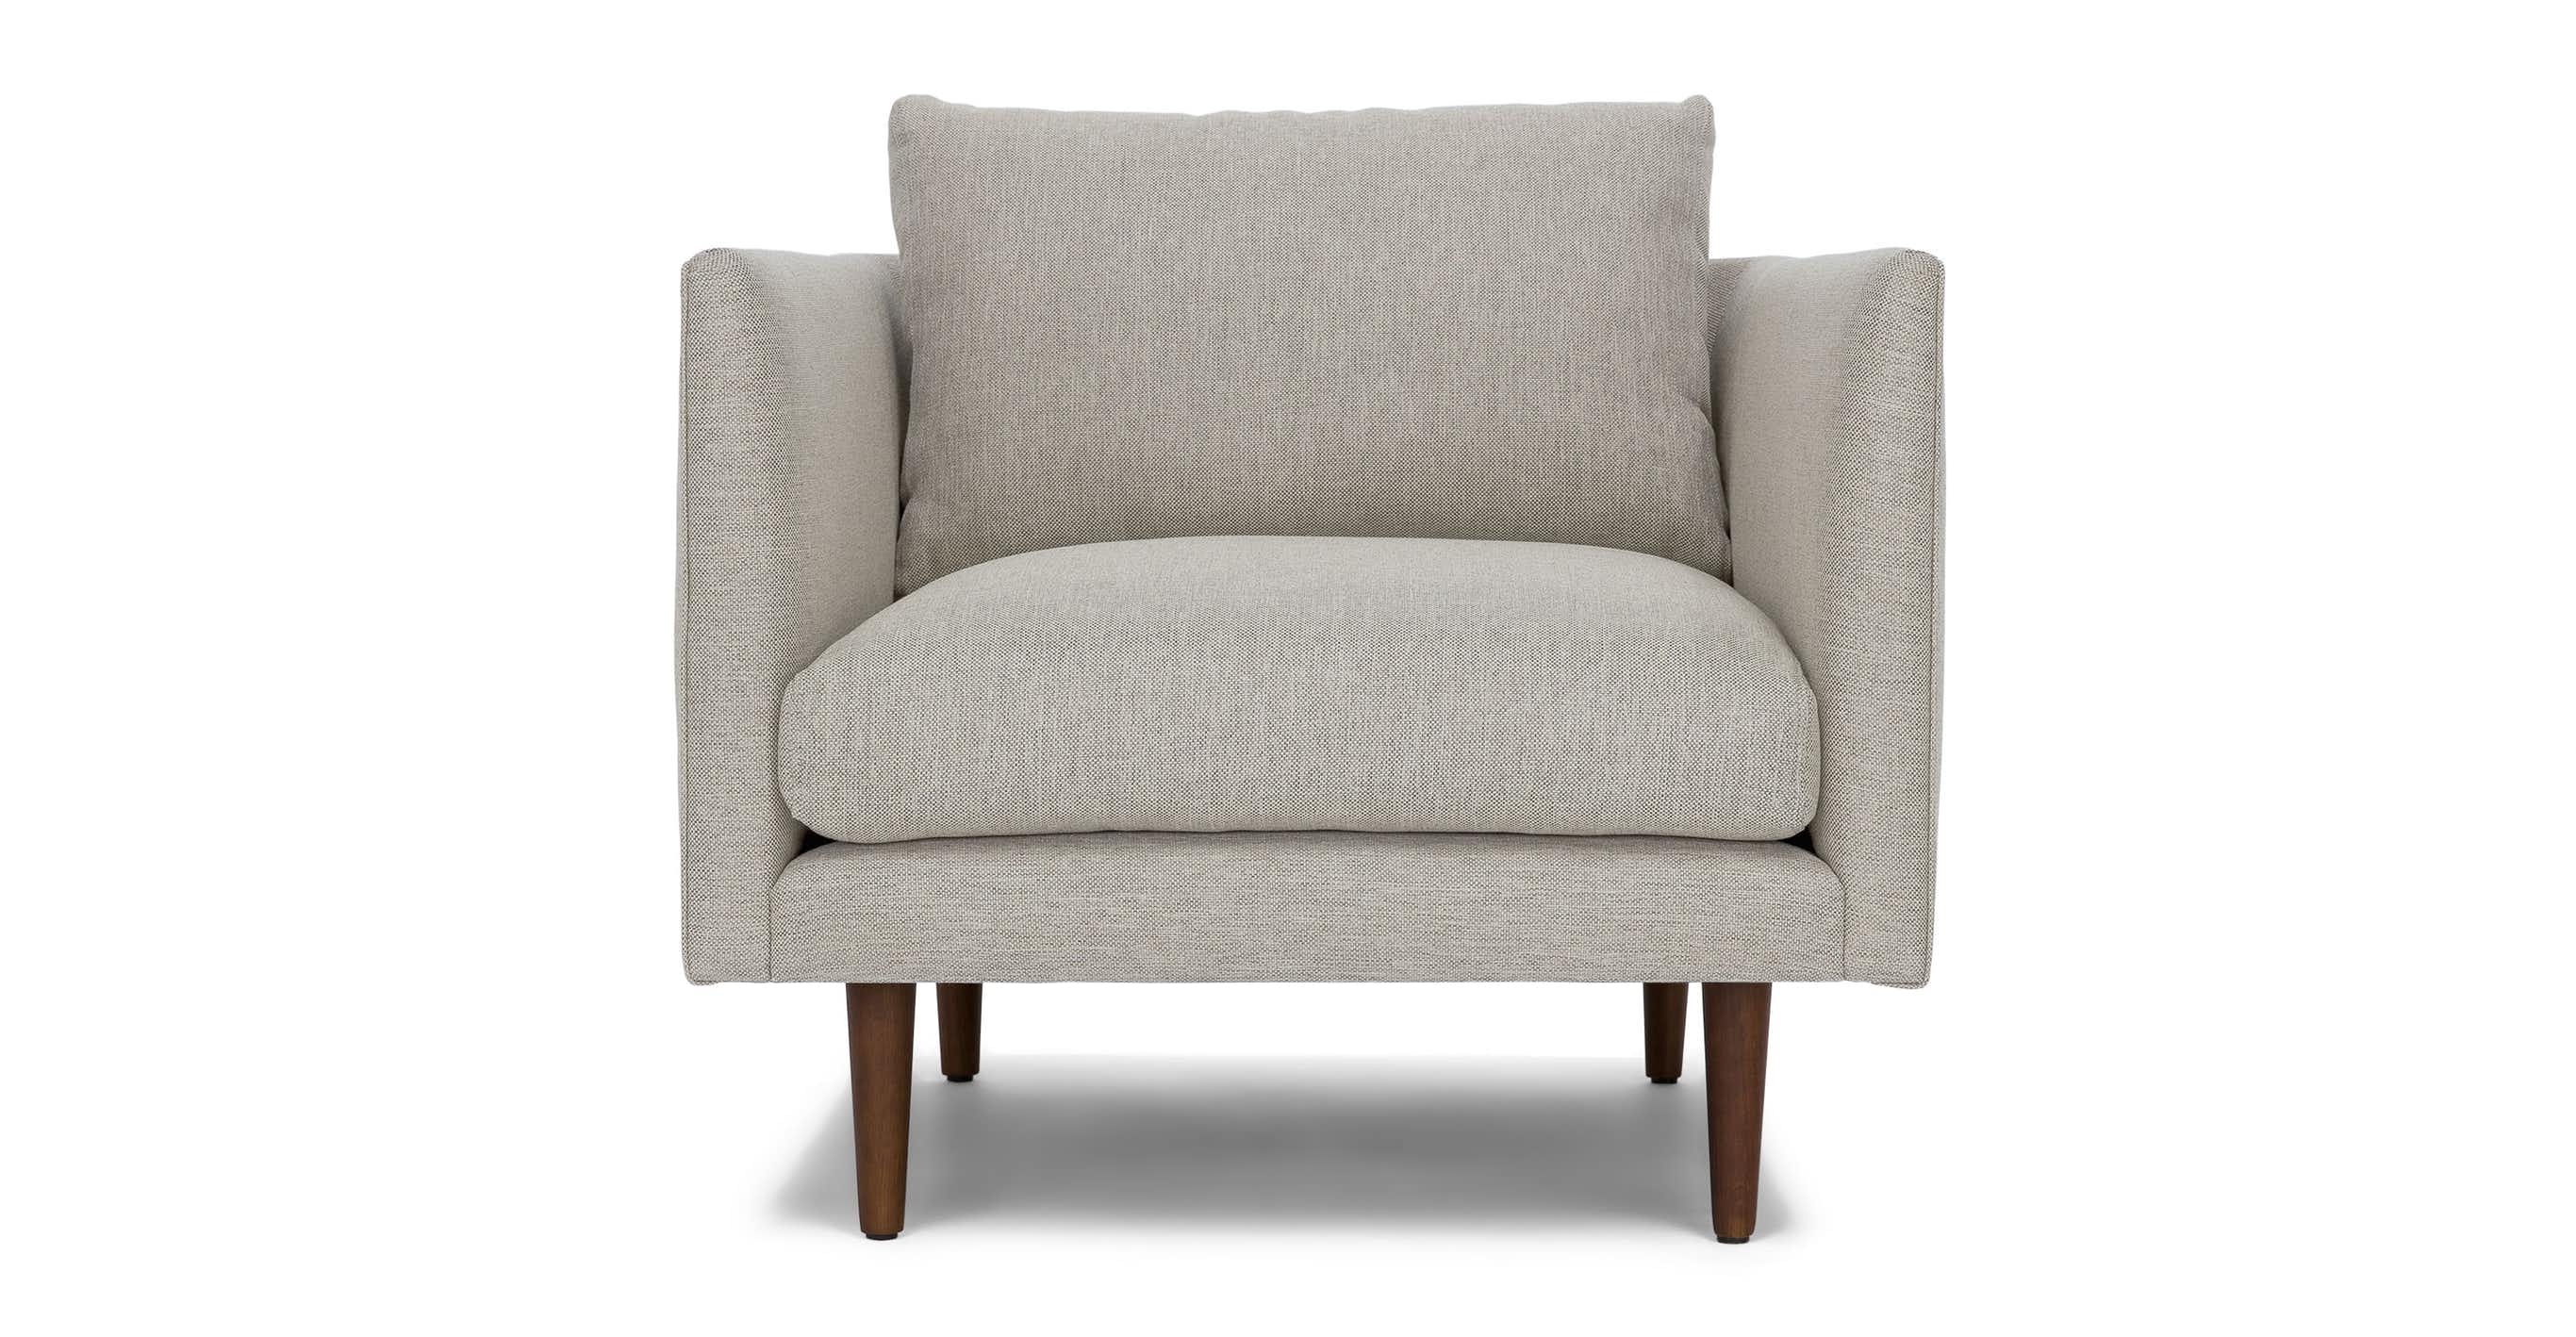 Burrard Accent Chair - Image 1